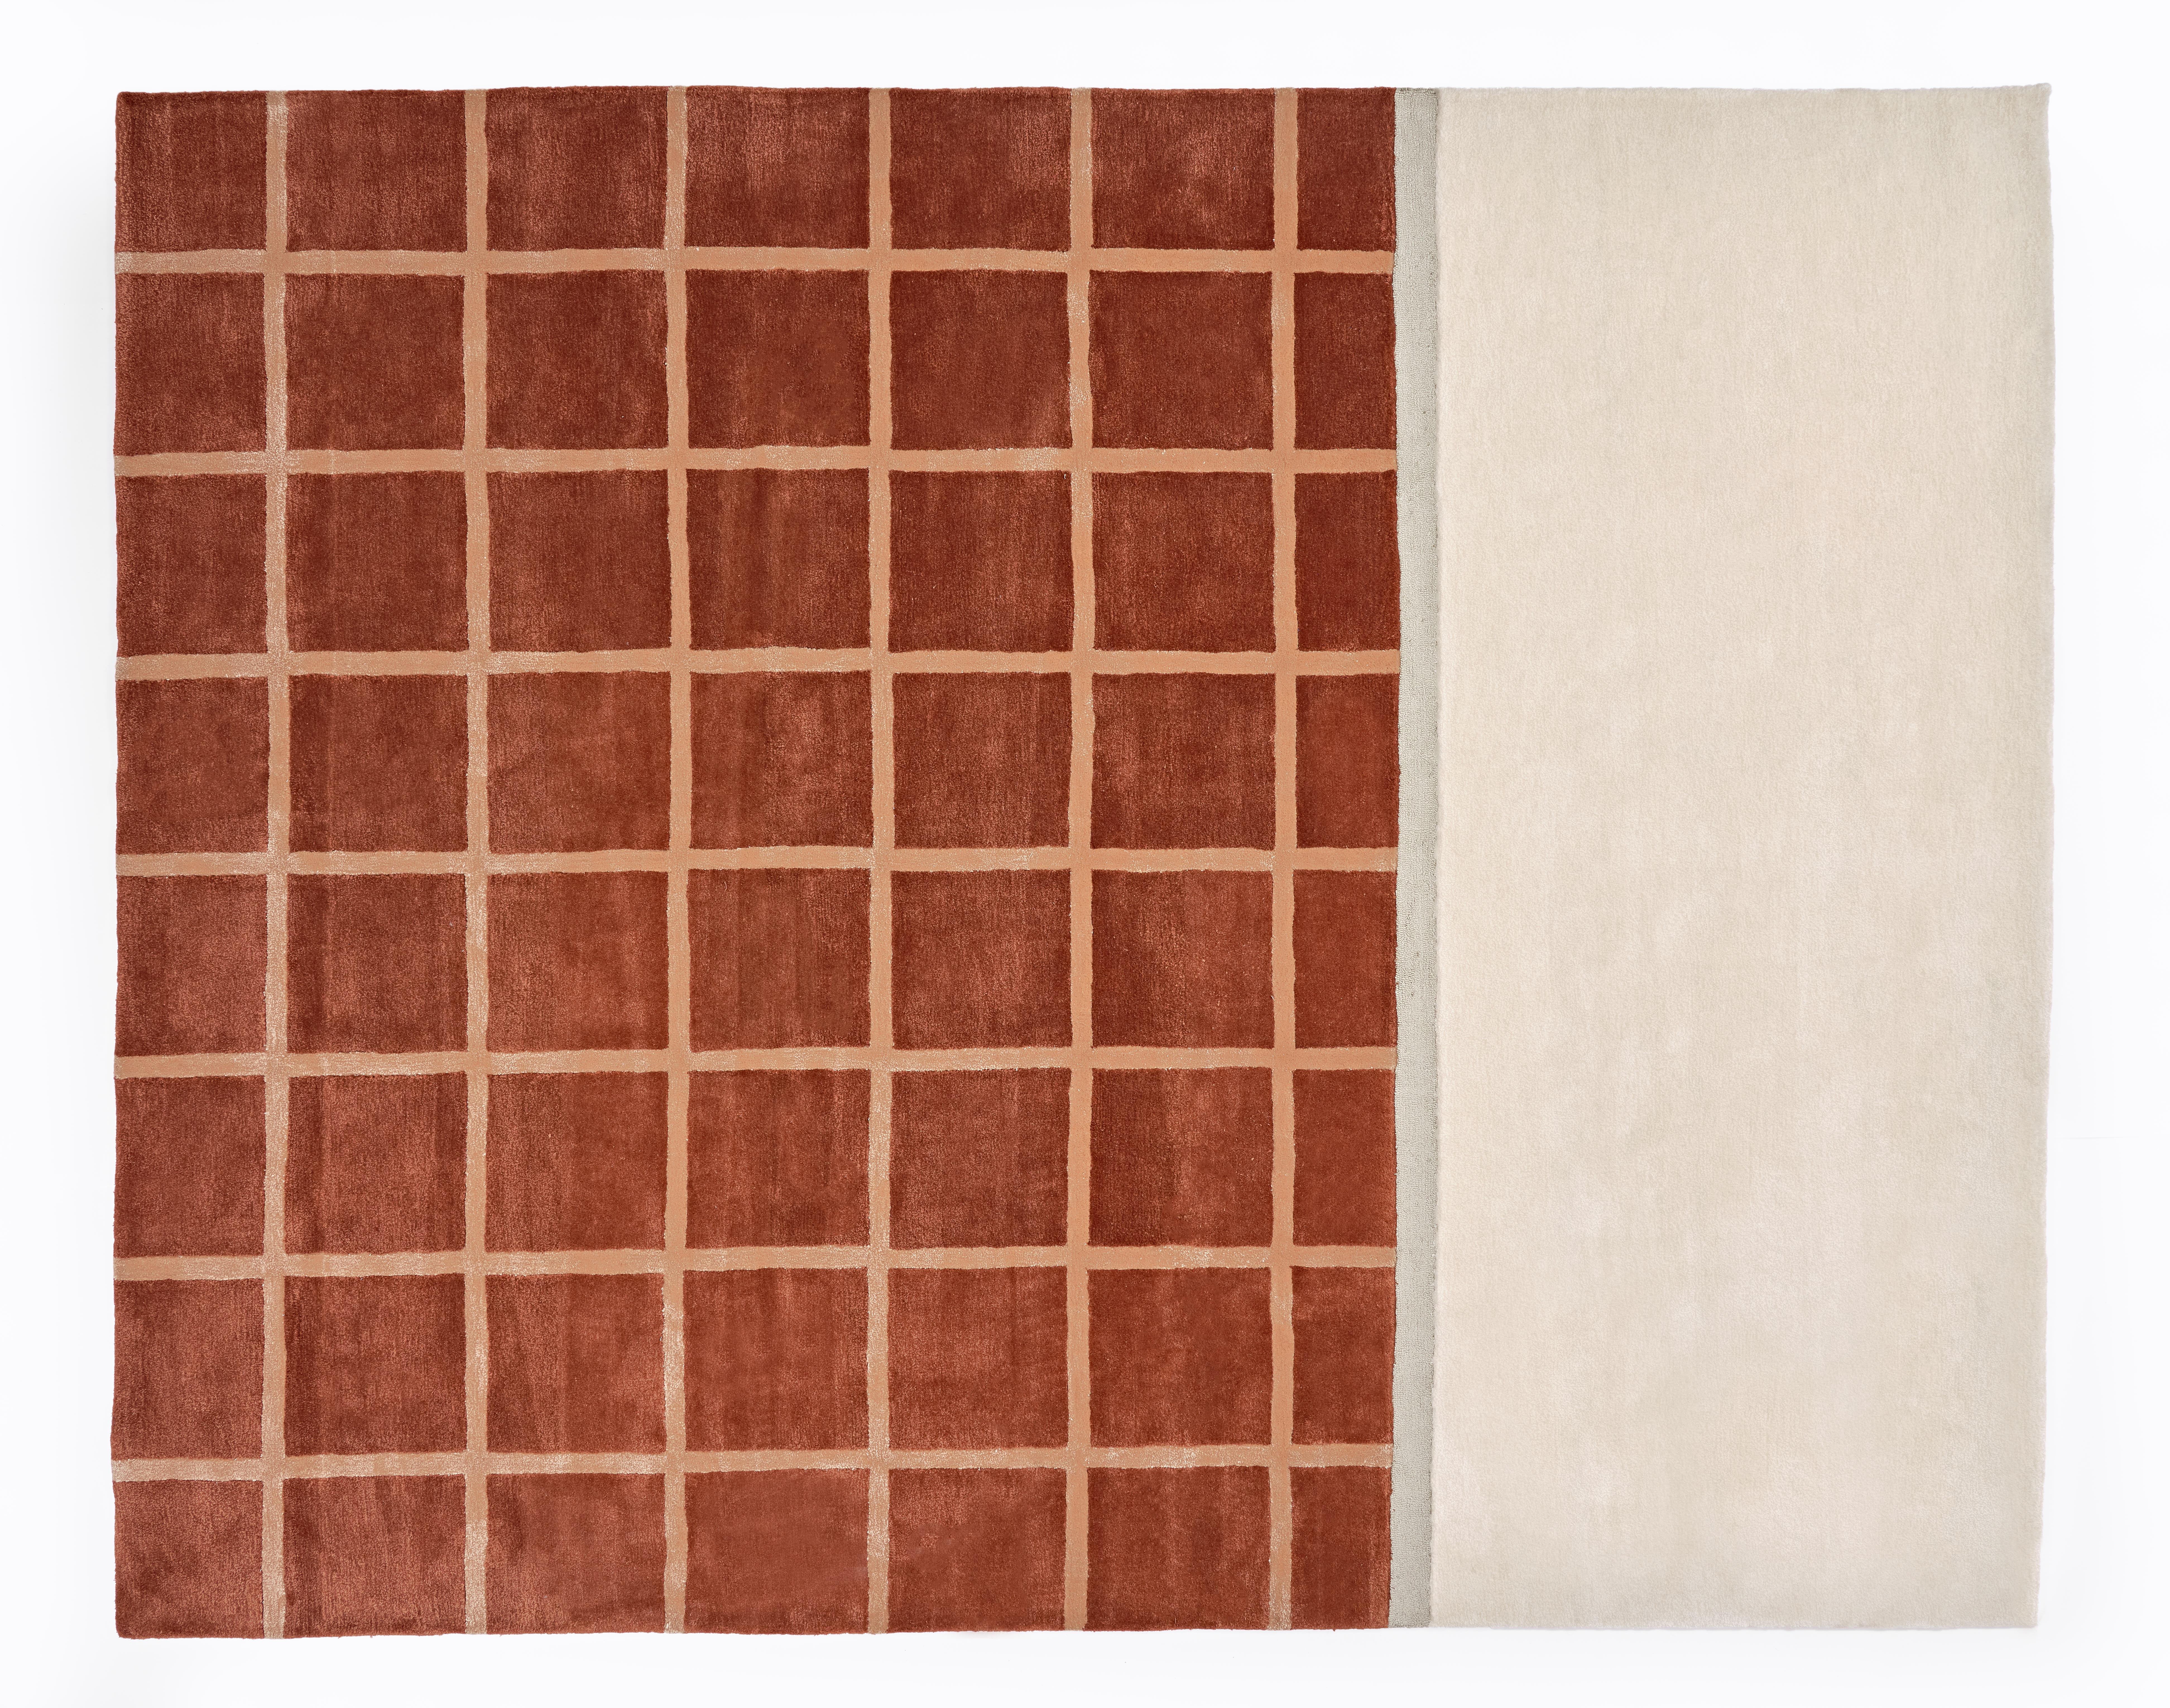 The Kenny rug features our signature grid pattern in a soft, modern color palette. Not another neutral to help ground a room. Rugs that make the room. Hand tufted rug made of a wool/viscose blend. Designed by Pieces.

Available in Garnet and